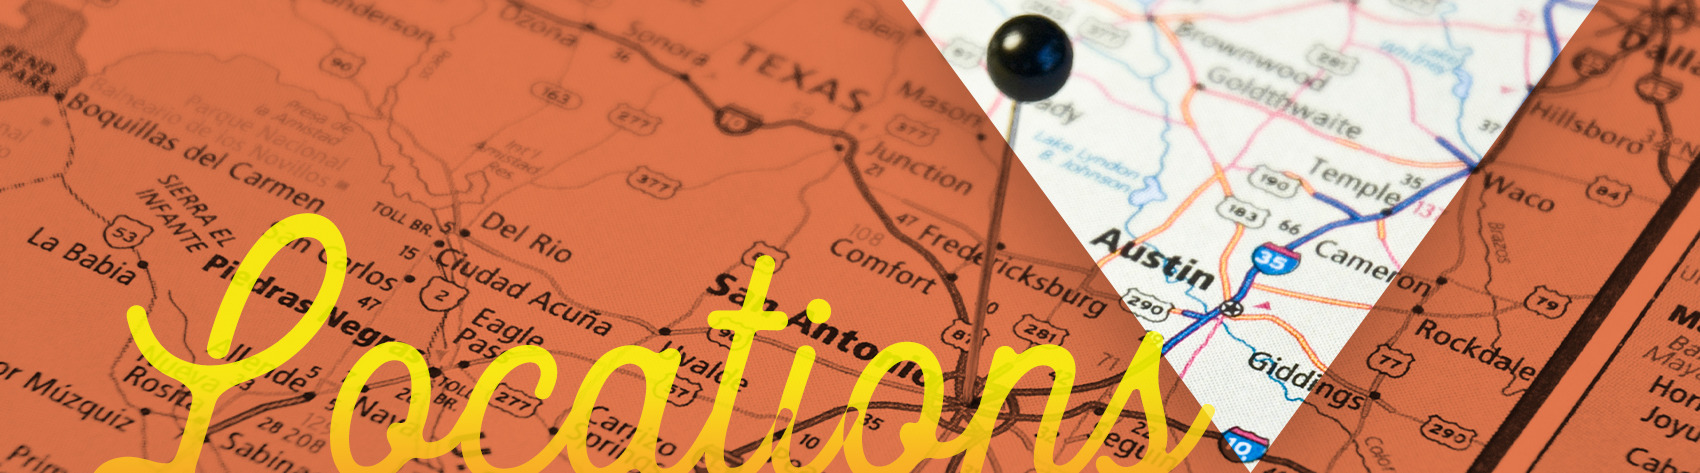 picture of a map with a pin in the city of San Antonio and the word "locations" over top